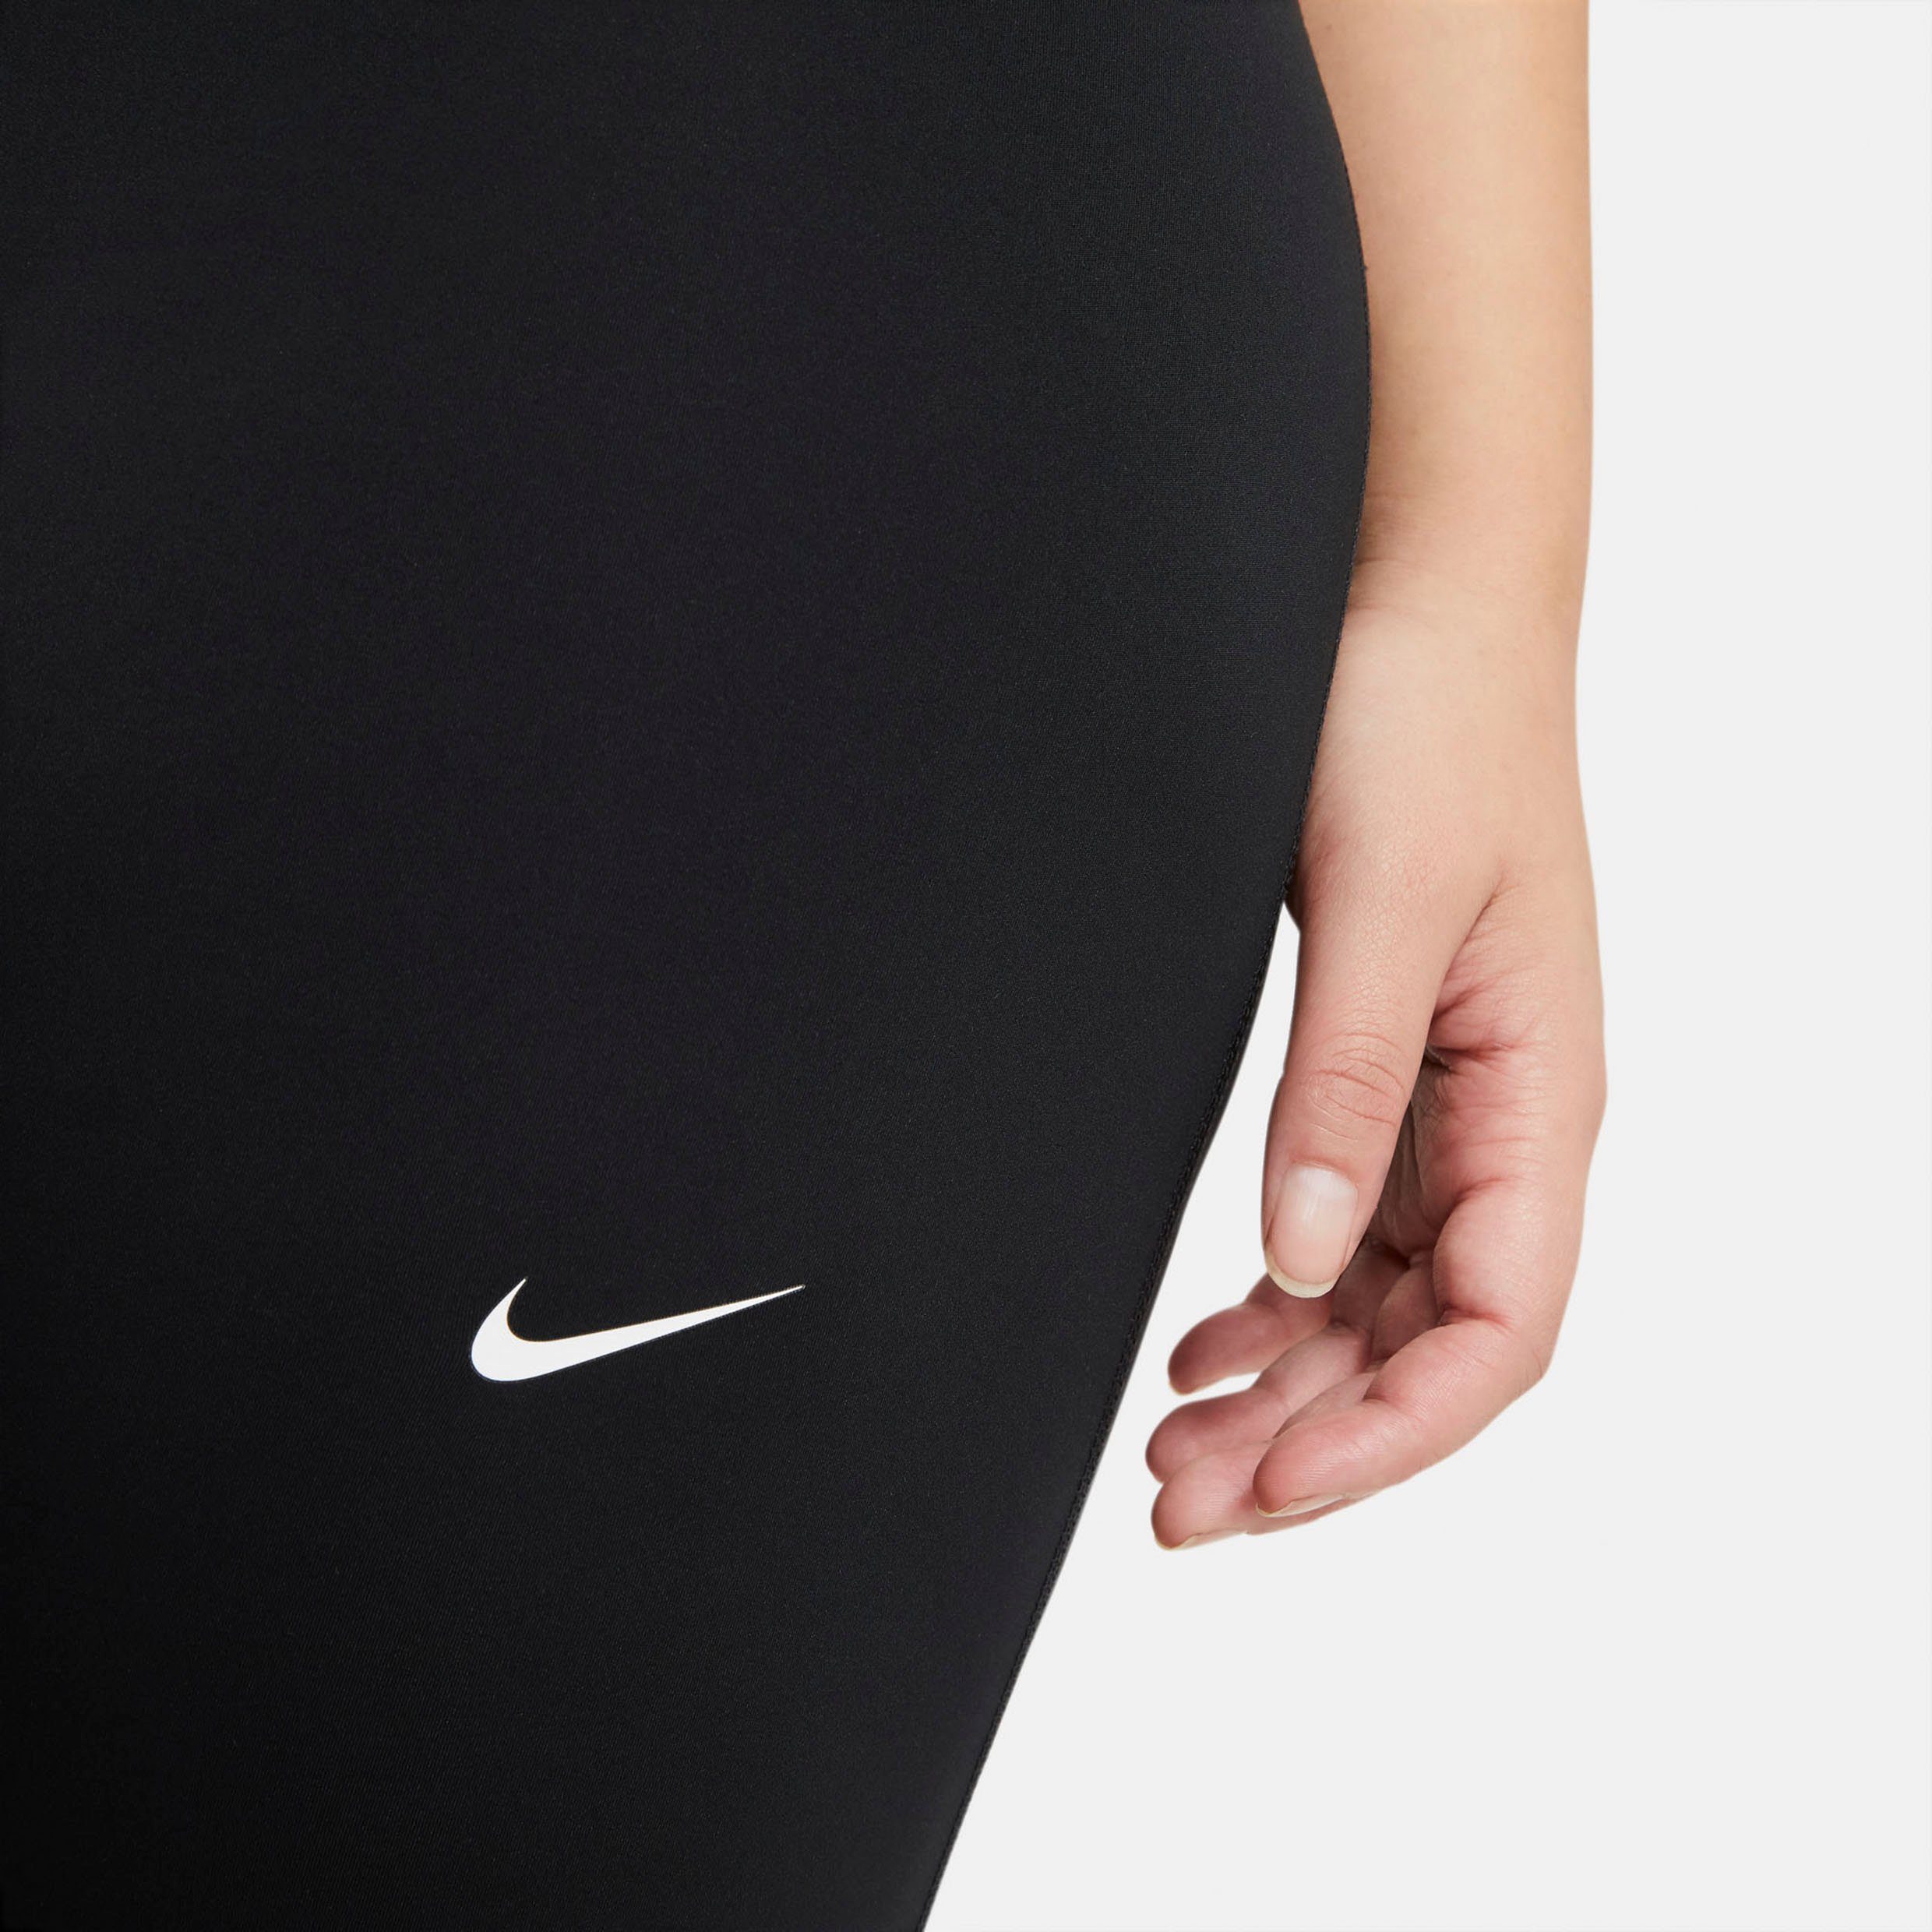 Nike Funktionstights Tights Size Cropped Nike 365 Pro Women's Plus